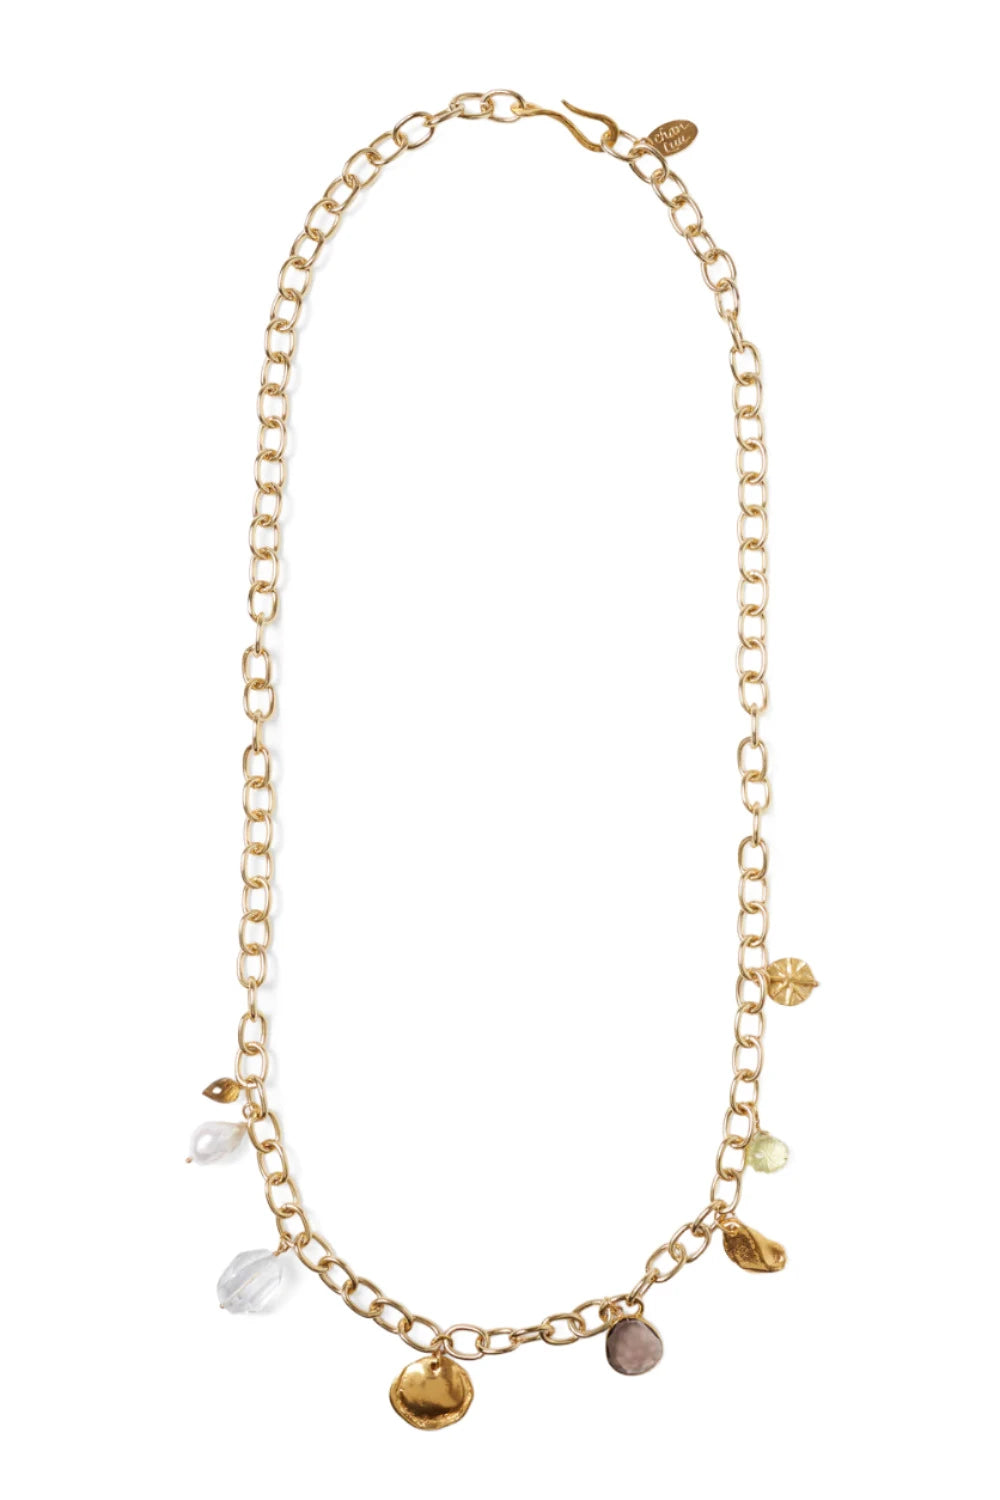 Anya Gold Mix Necklace